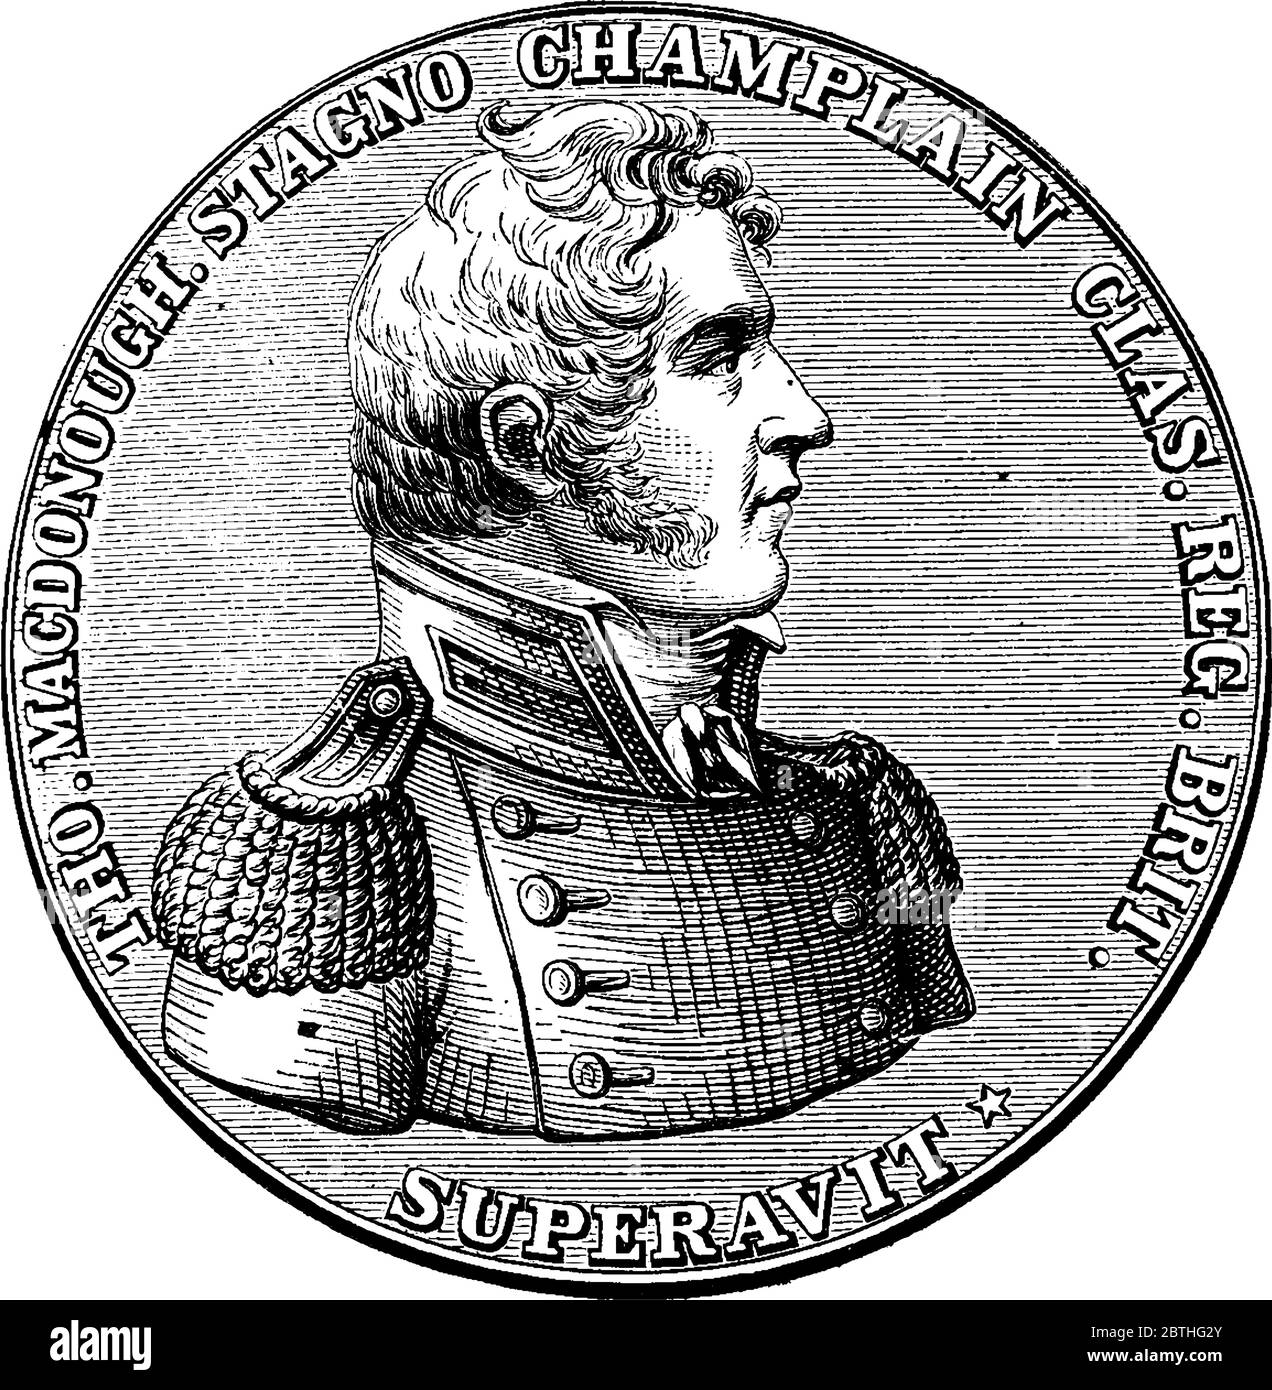 Macdonough's Medal, Thomas MacDonough was an early 19th-century American naval officer, most notable as commander of American naval forces in Lake Cha Stock Vector